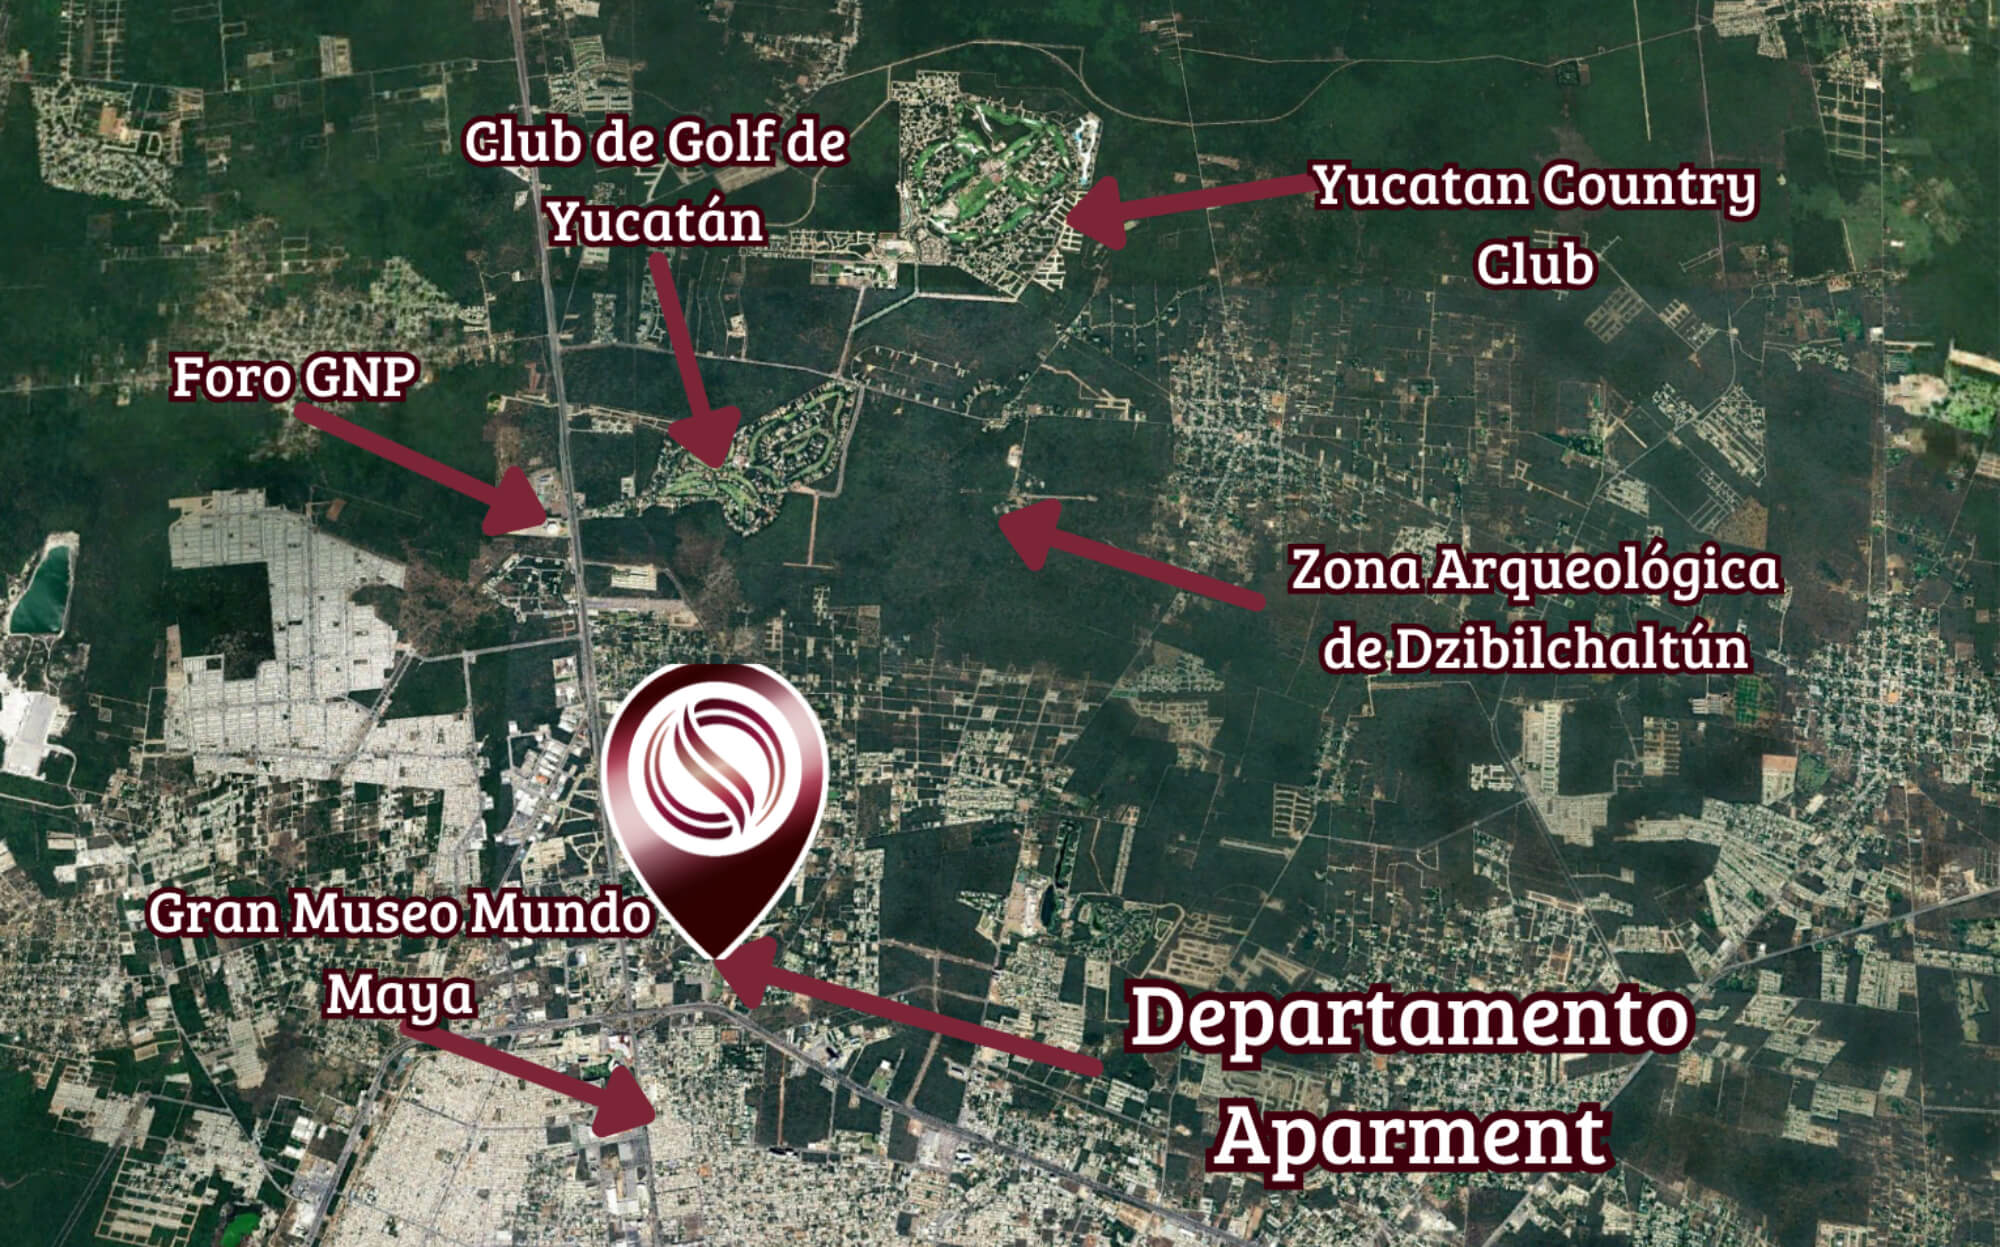 Condominium with concierge and driver, clubhouse, and exclusive amenities, pre-construction for sale in Mérida.